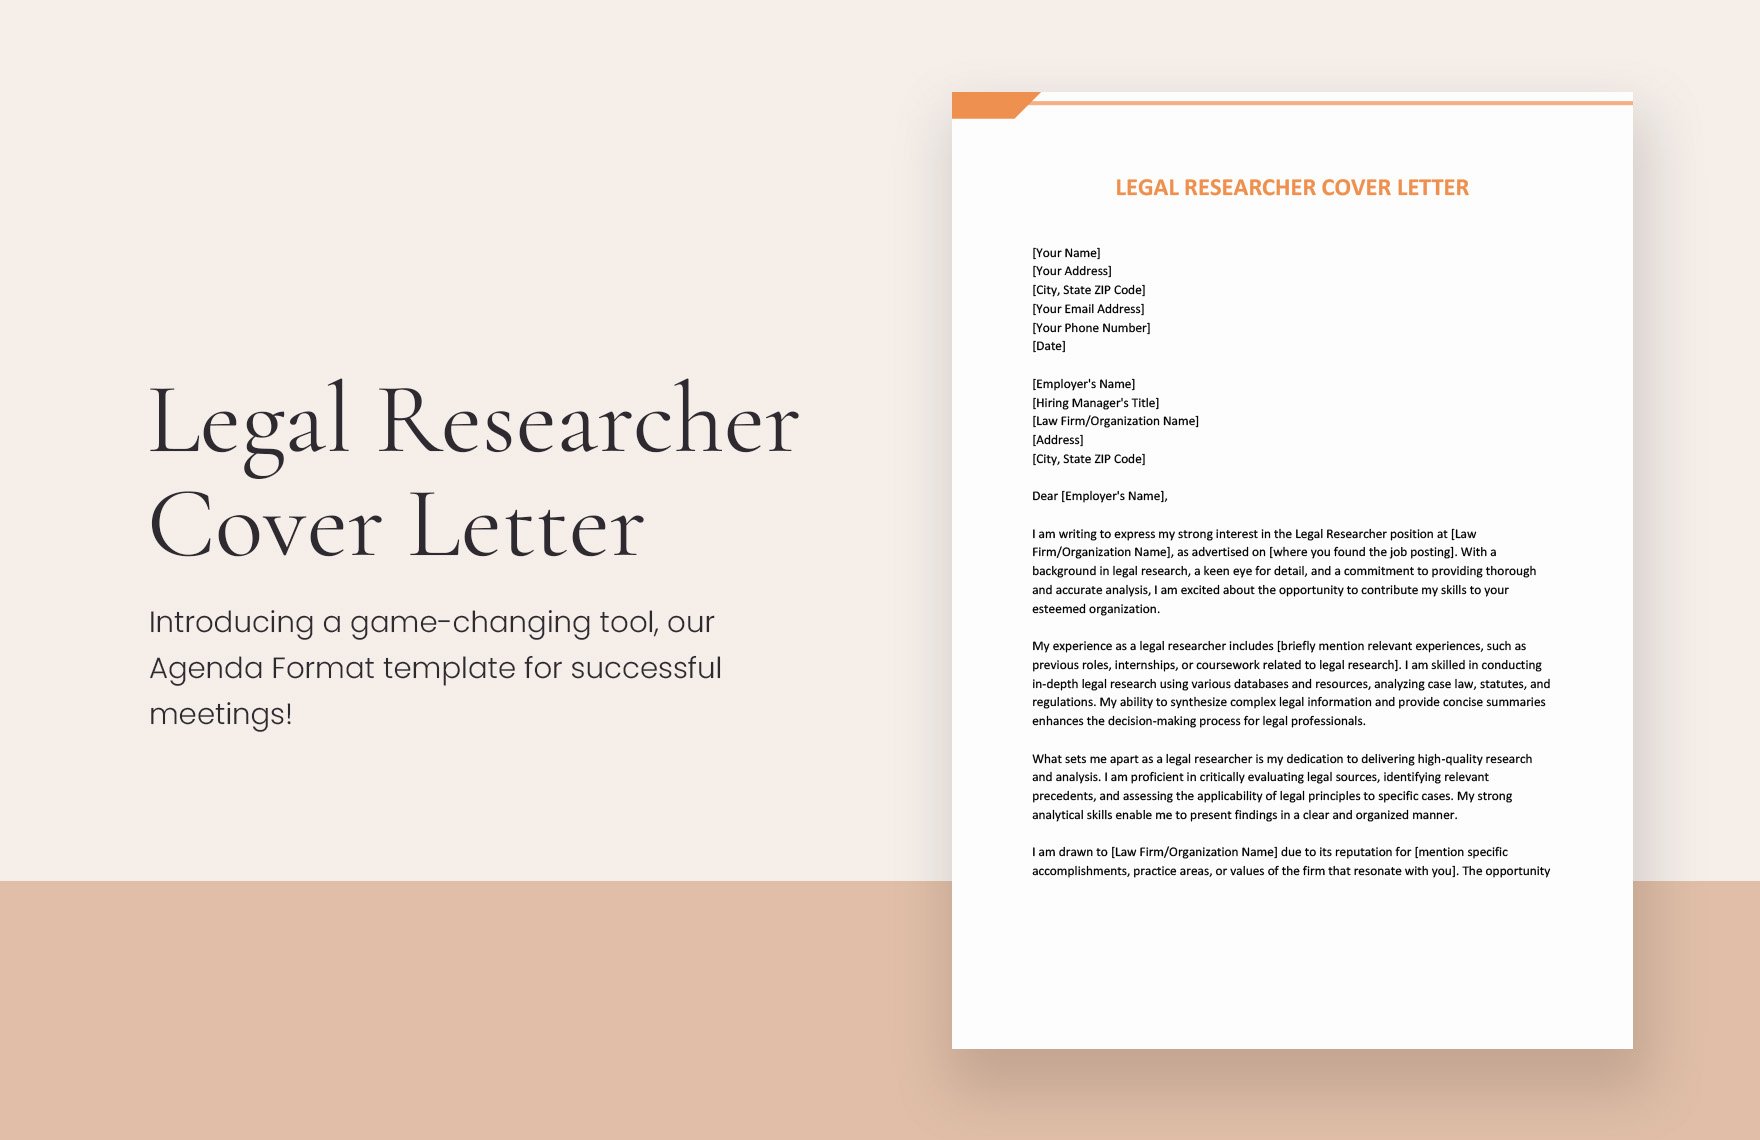 Legal Researcher Cover Letter in Word, Google Docs